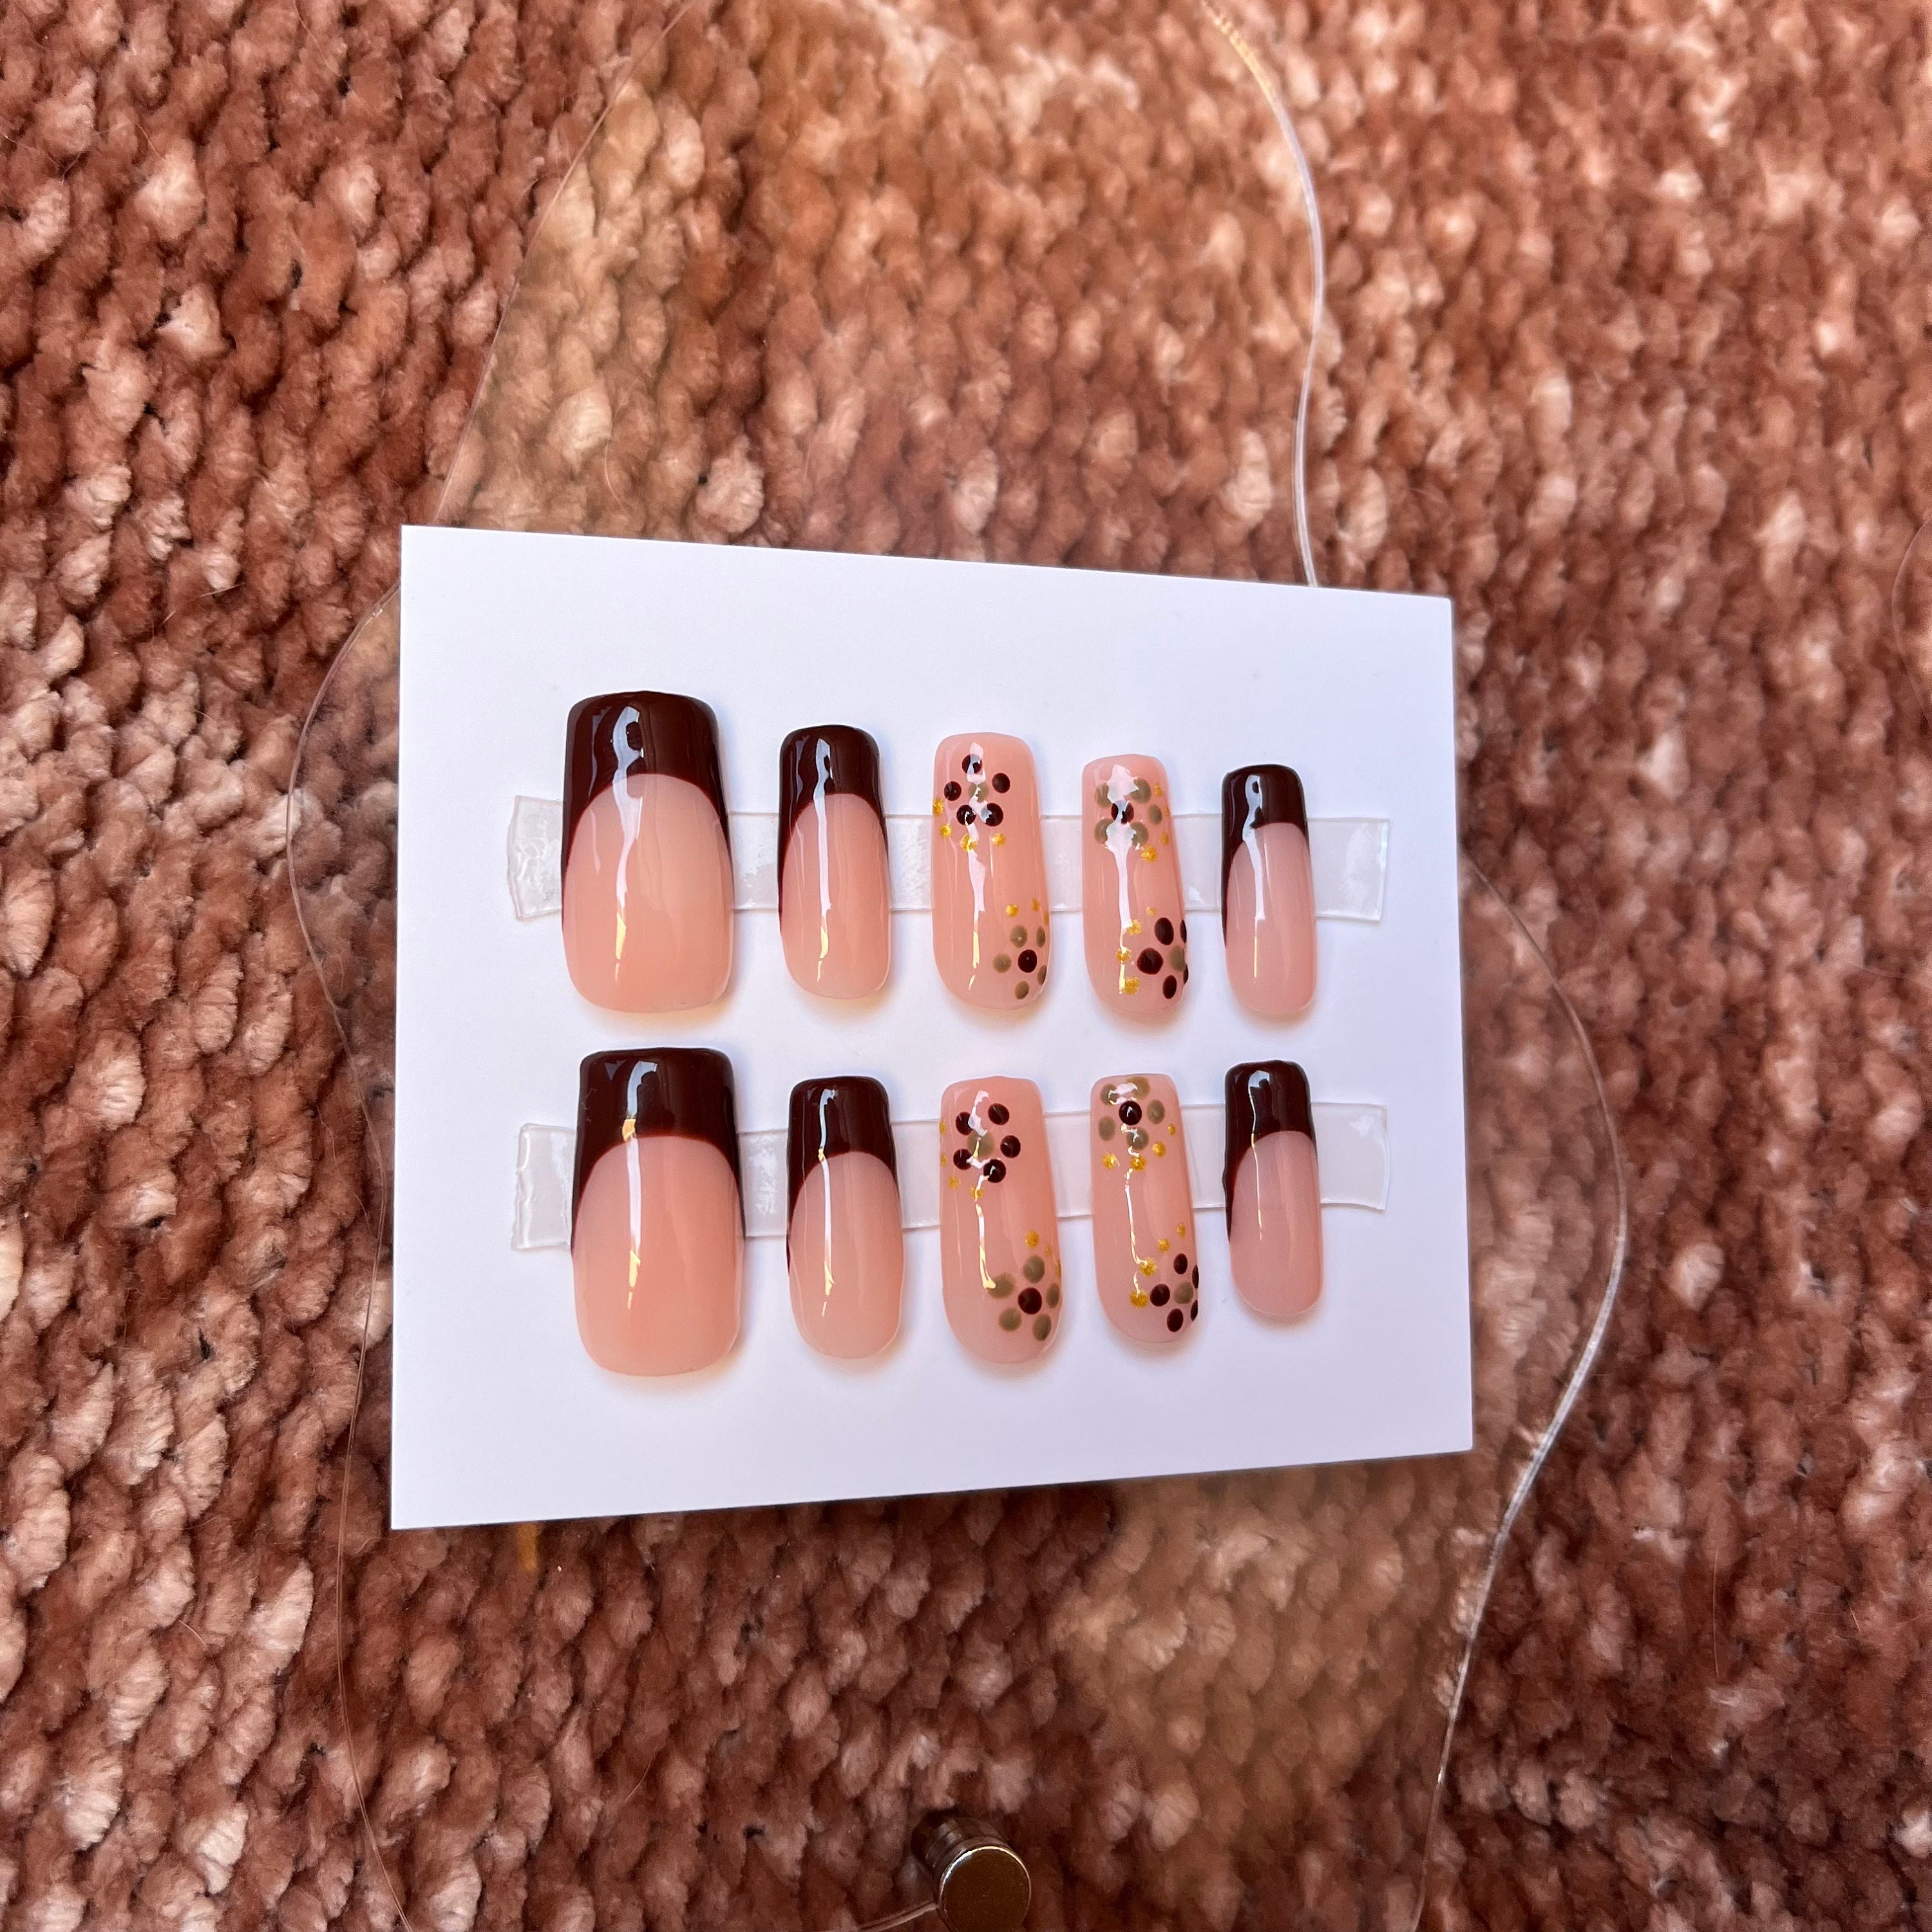 Brown French Tip Press on Nails, Y2K Flowers, Rhinestones Almond Nails,  Coffin Nails, Square Nails 